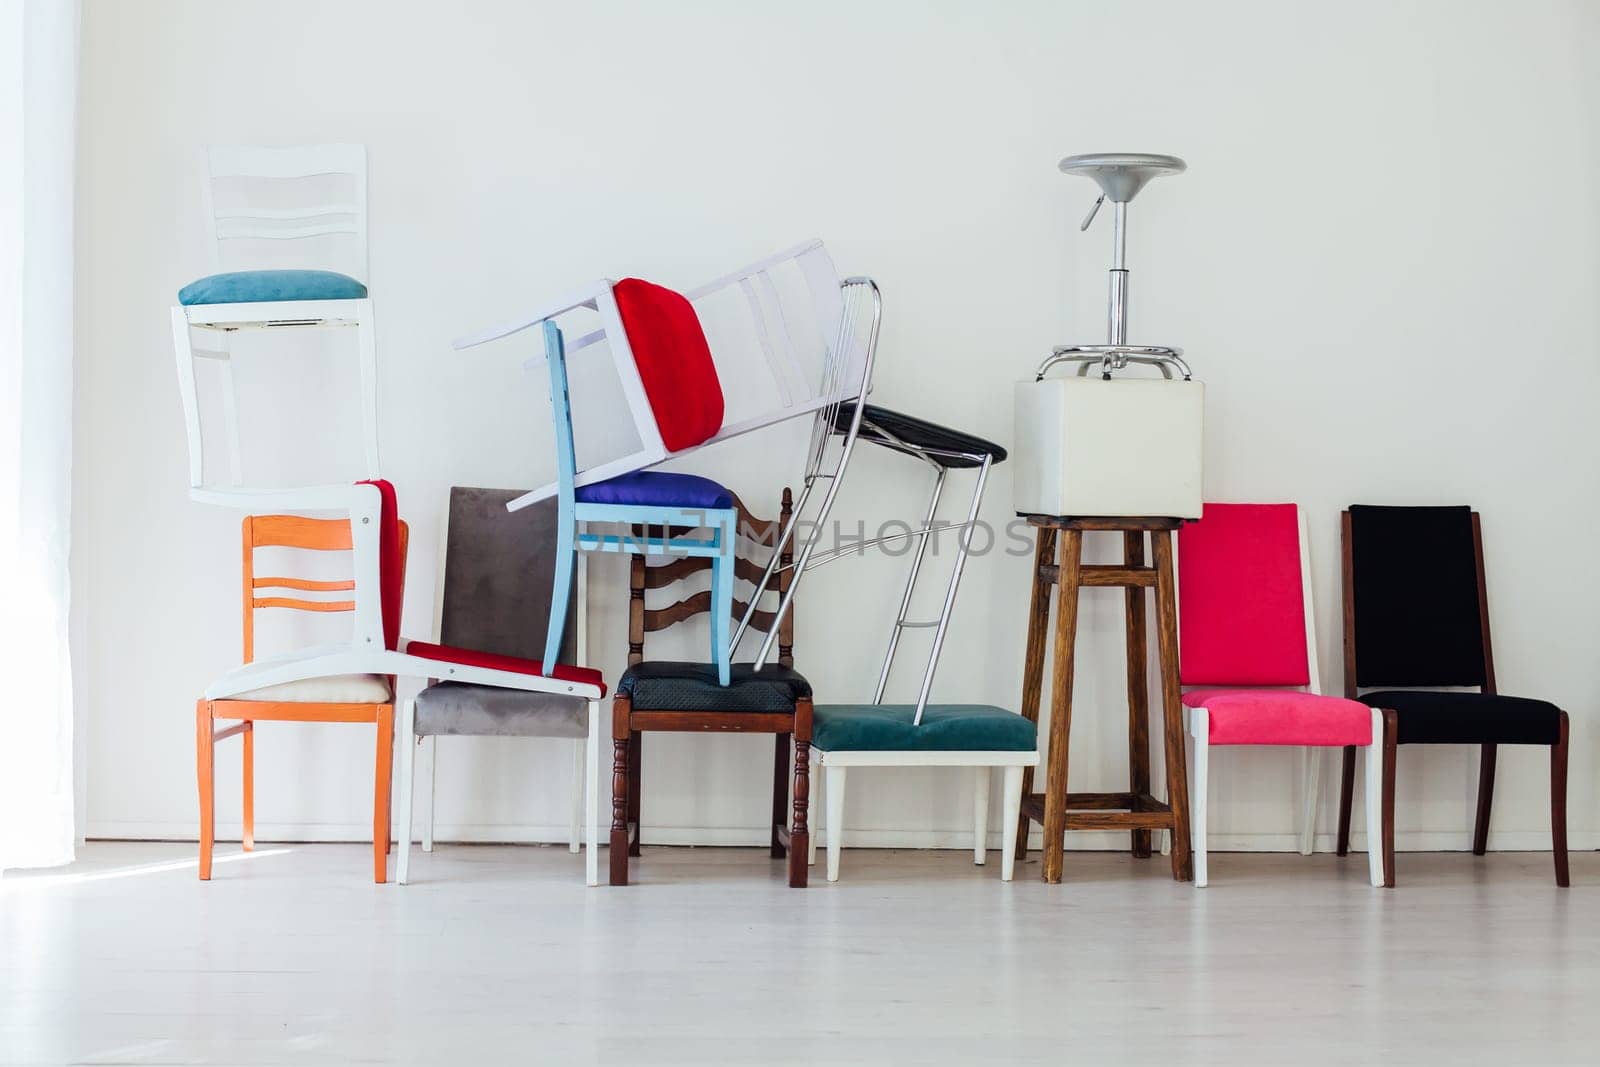 many different chairs in disarray in the interior of an empty white room